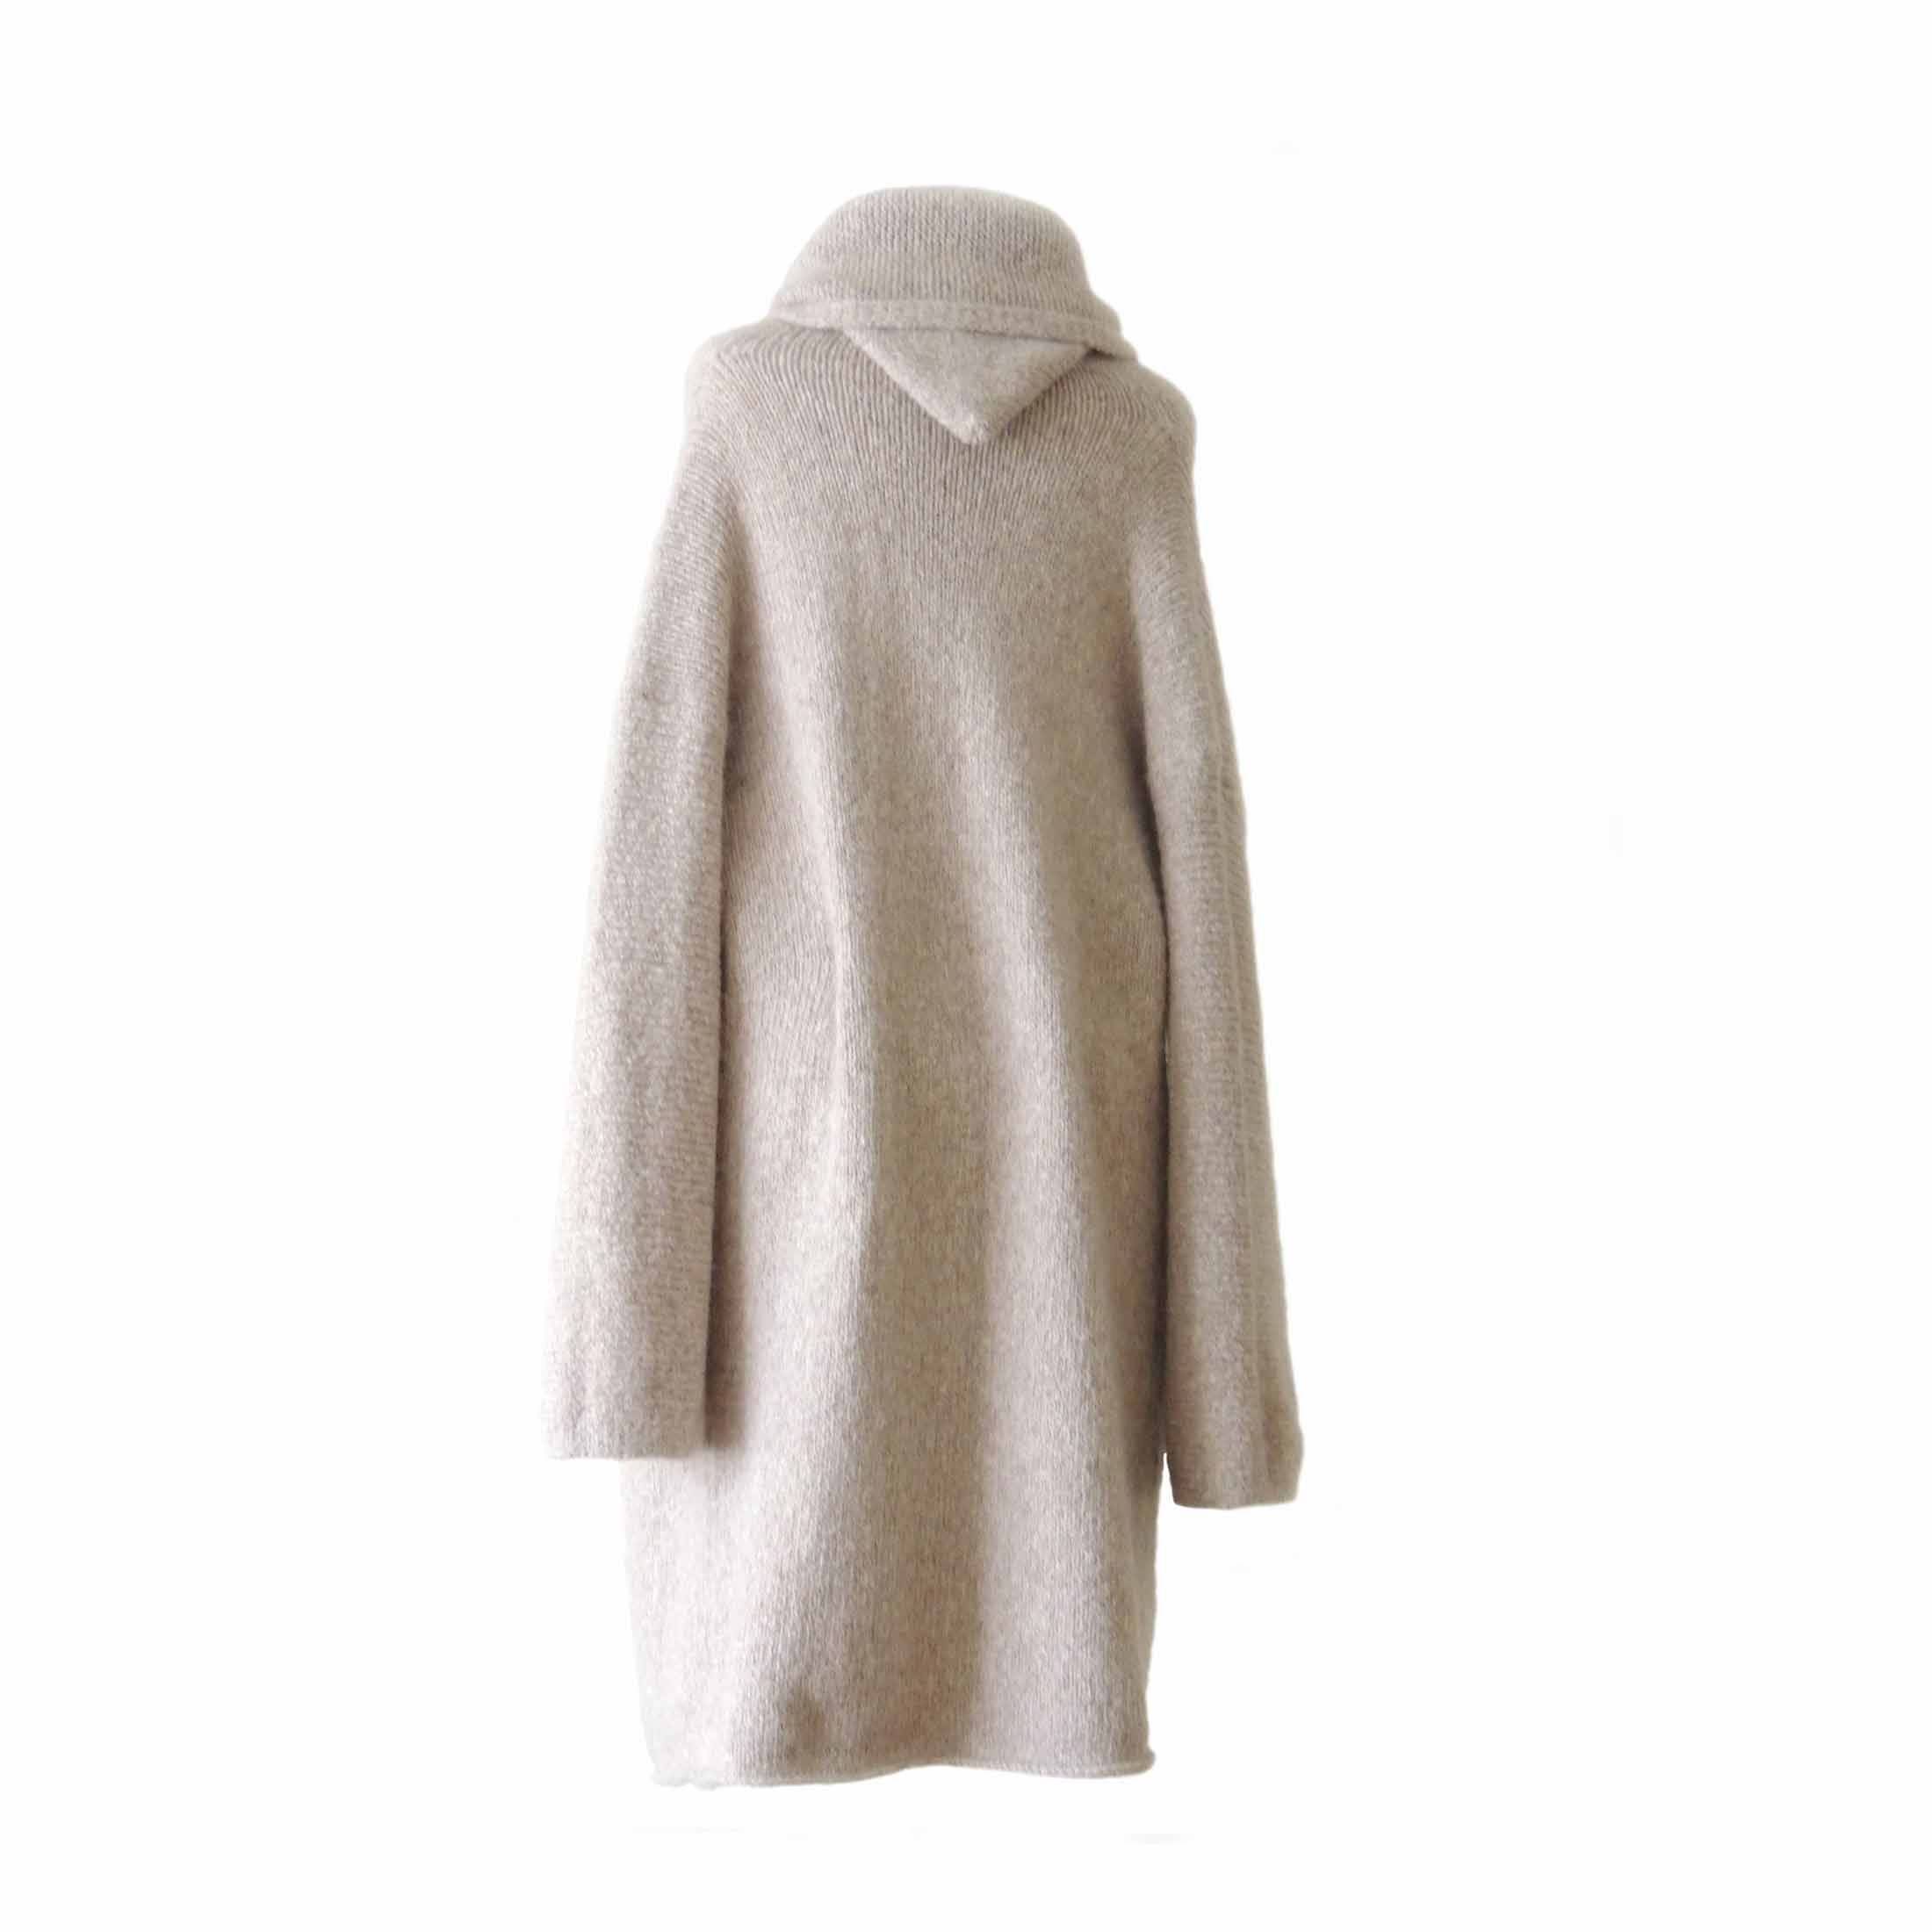 Capote Coat Cardigan Hand Knitted Oversized Hooded / Non - Etsy